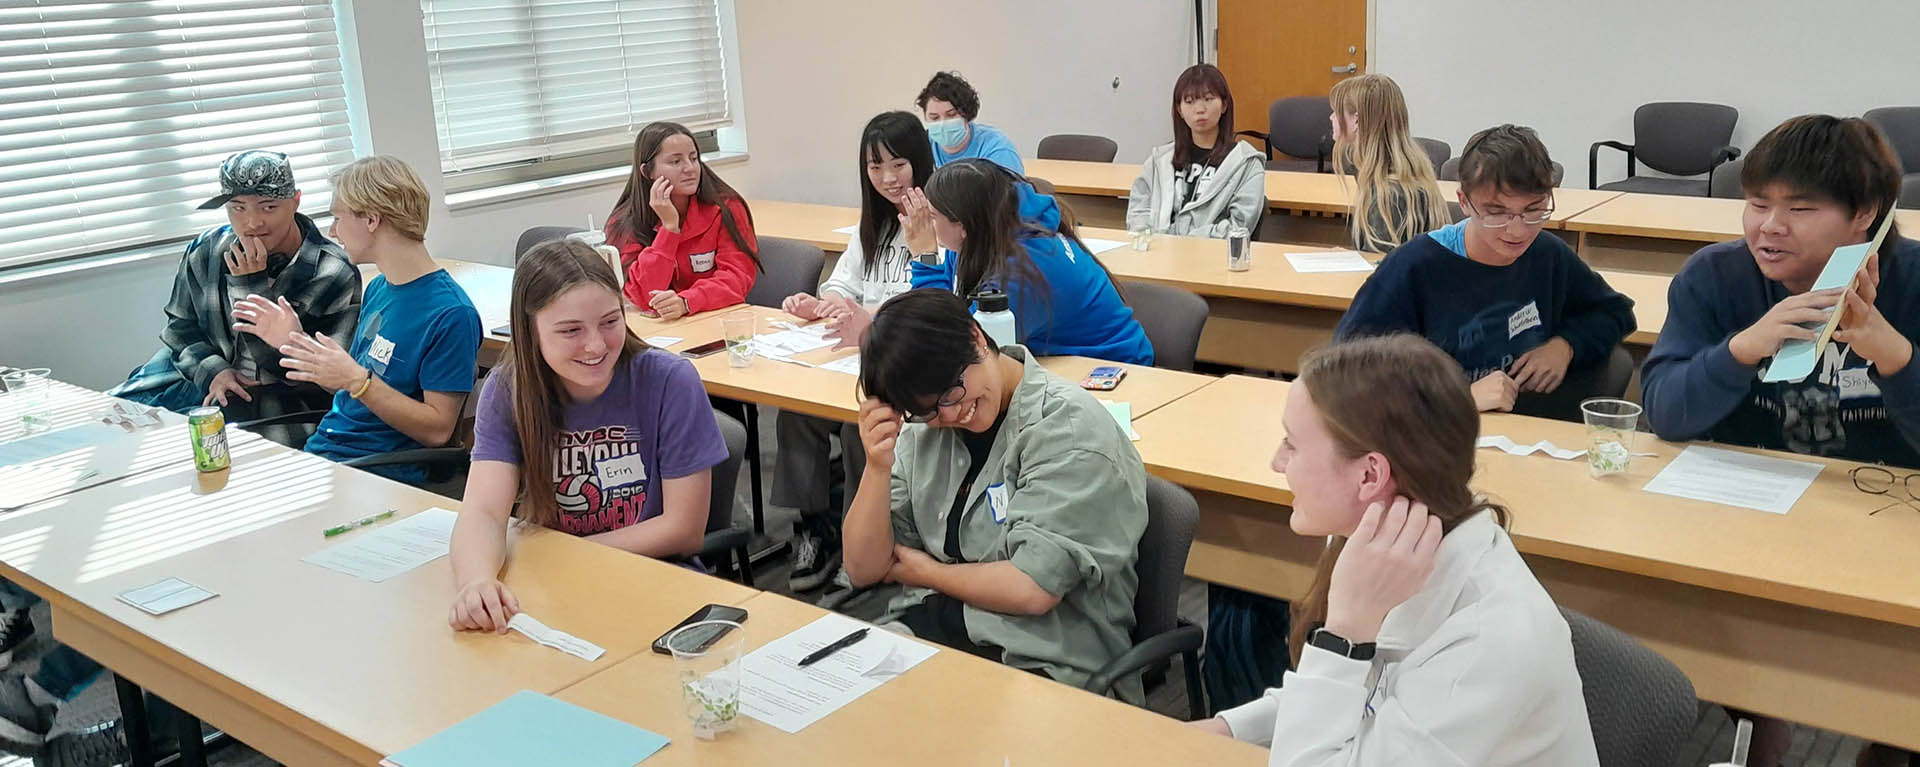 Students smile during a class group discussion.